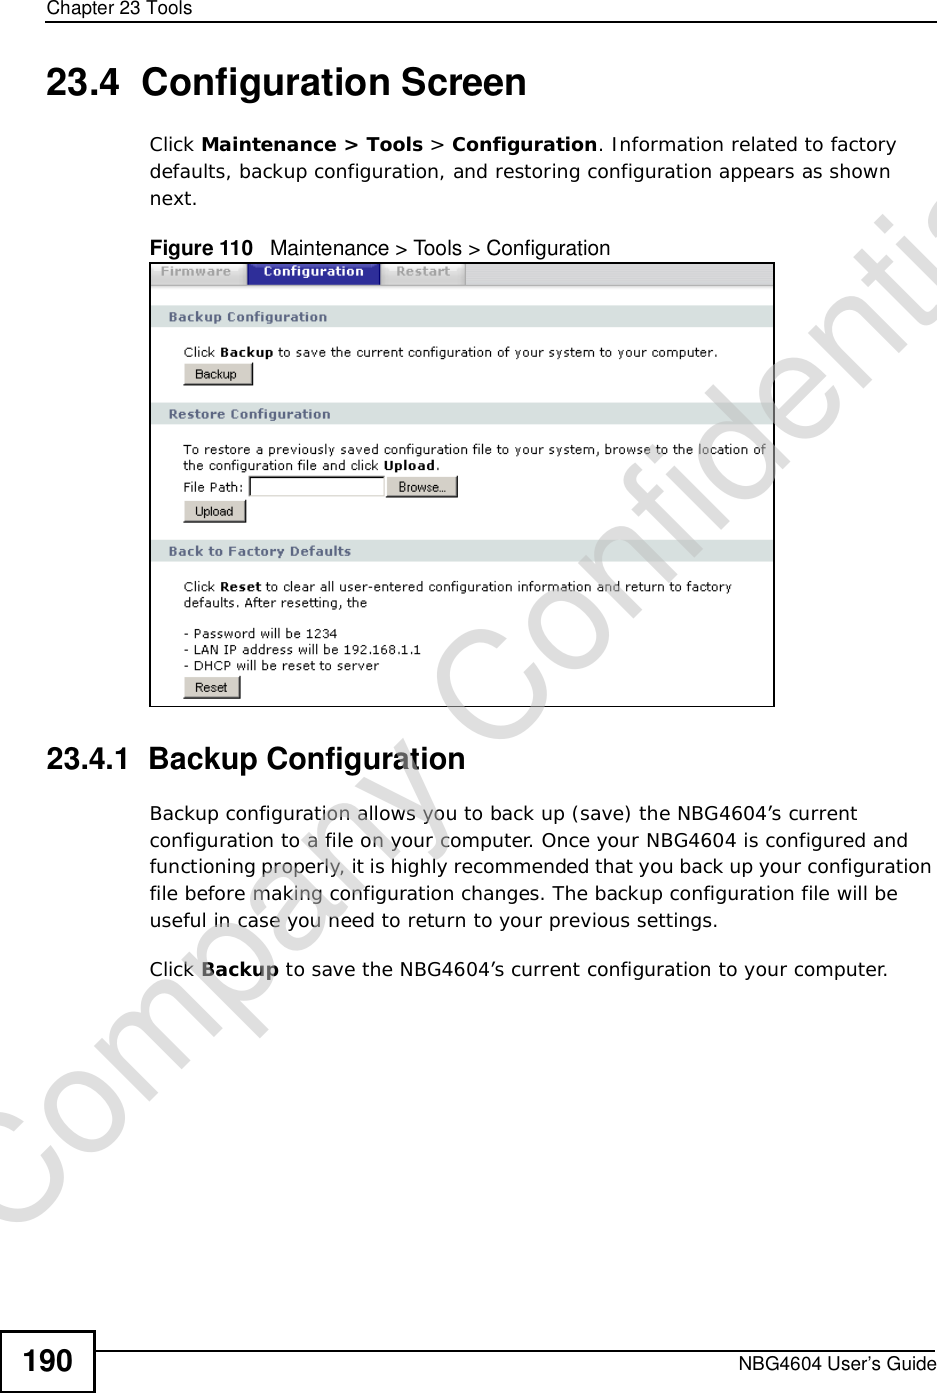 Chapter 23ToolsNBG4604 User’s Guide19023.4  Configuration ScreenClick Maintenance &gt; Tools &gt; Configuration. Information related to factory defaults, backup configuration, and restoring configuration appears as shown next.Figure 110   Maintenance &gt; Tools &gt; Configuration 23.4.1  Backup ConfigurationBackup configuration allows you to back up (save) the NBG4604’s current configuration to a file on your computer. Once your NBG4604 is configured and functioning properly, it is highly recommended that you back up your configuration file before making configuration changes. The backup configuration file will be useful in case you need to return to your previous settings. Click Backup to save the NBG4604’s current configuration to your computer.Company Confidential